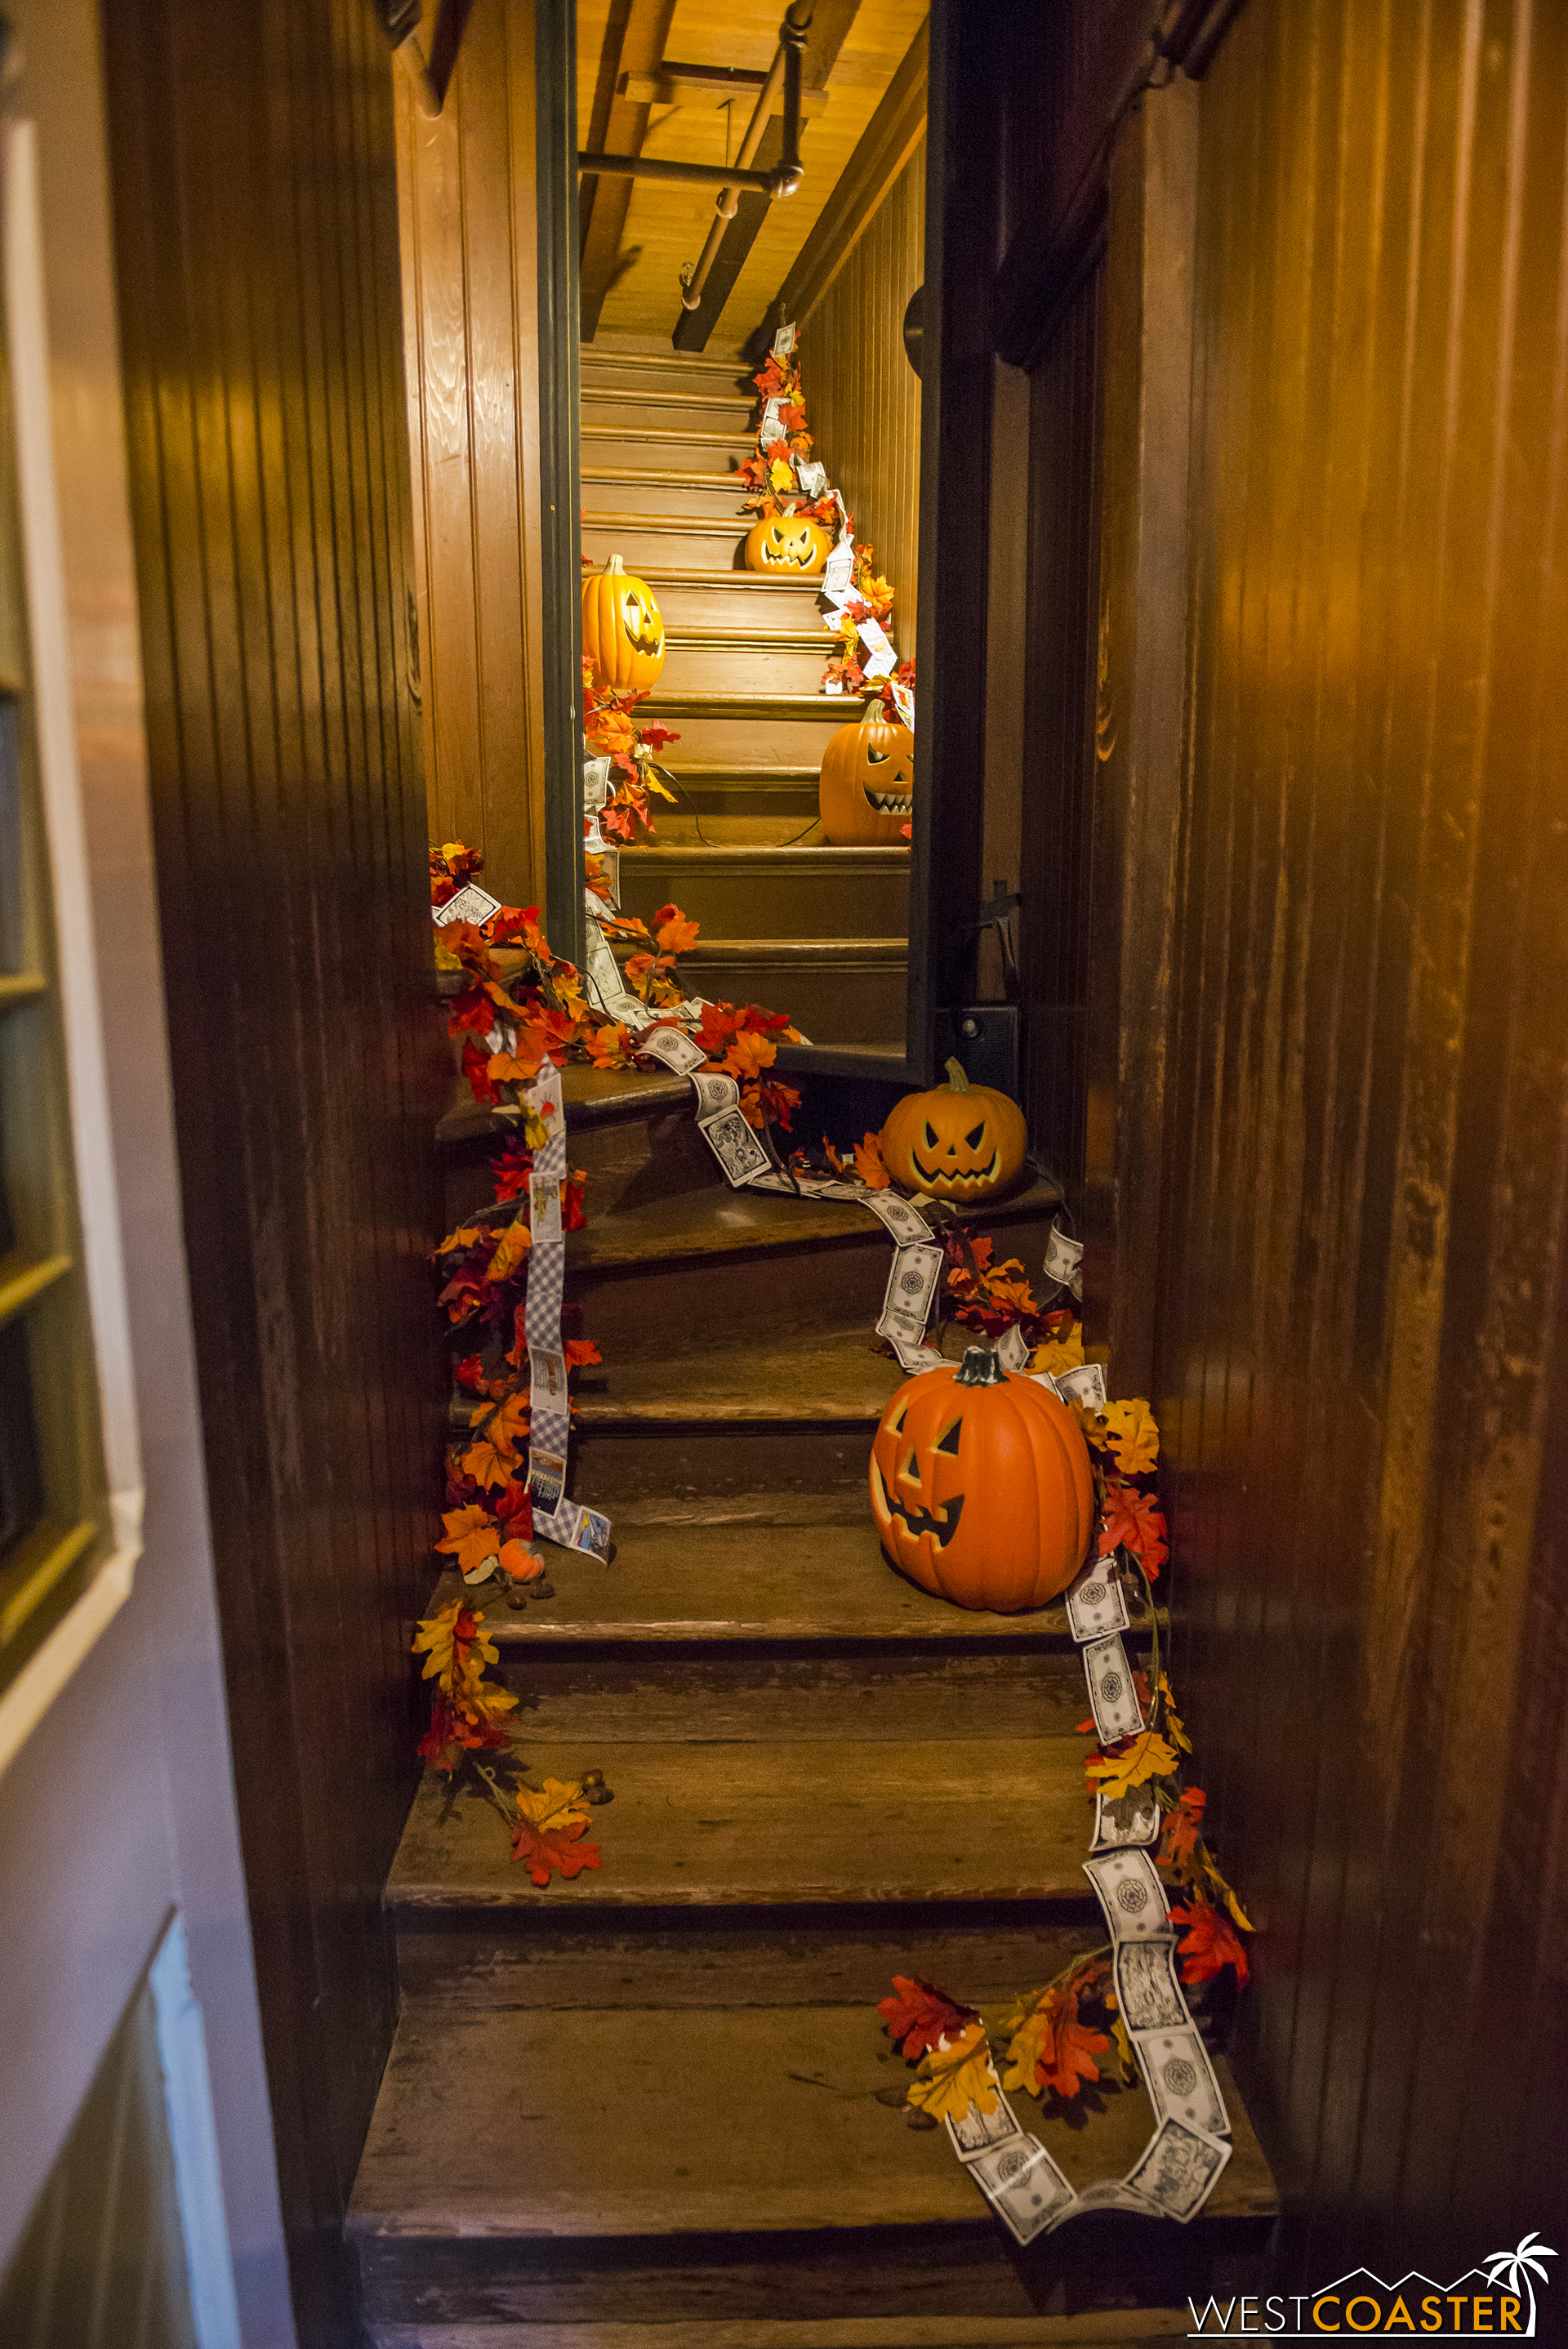  The famous stairway to nowhere is decorated with tarot cards and jack-o-lanterns for Halloween. 